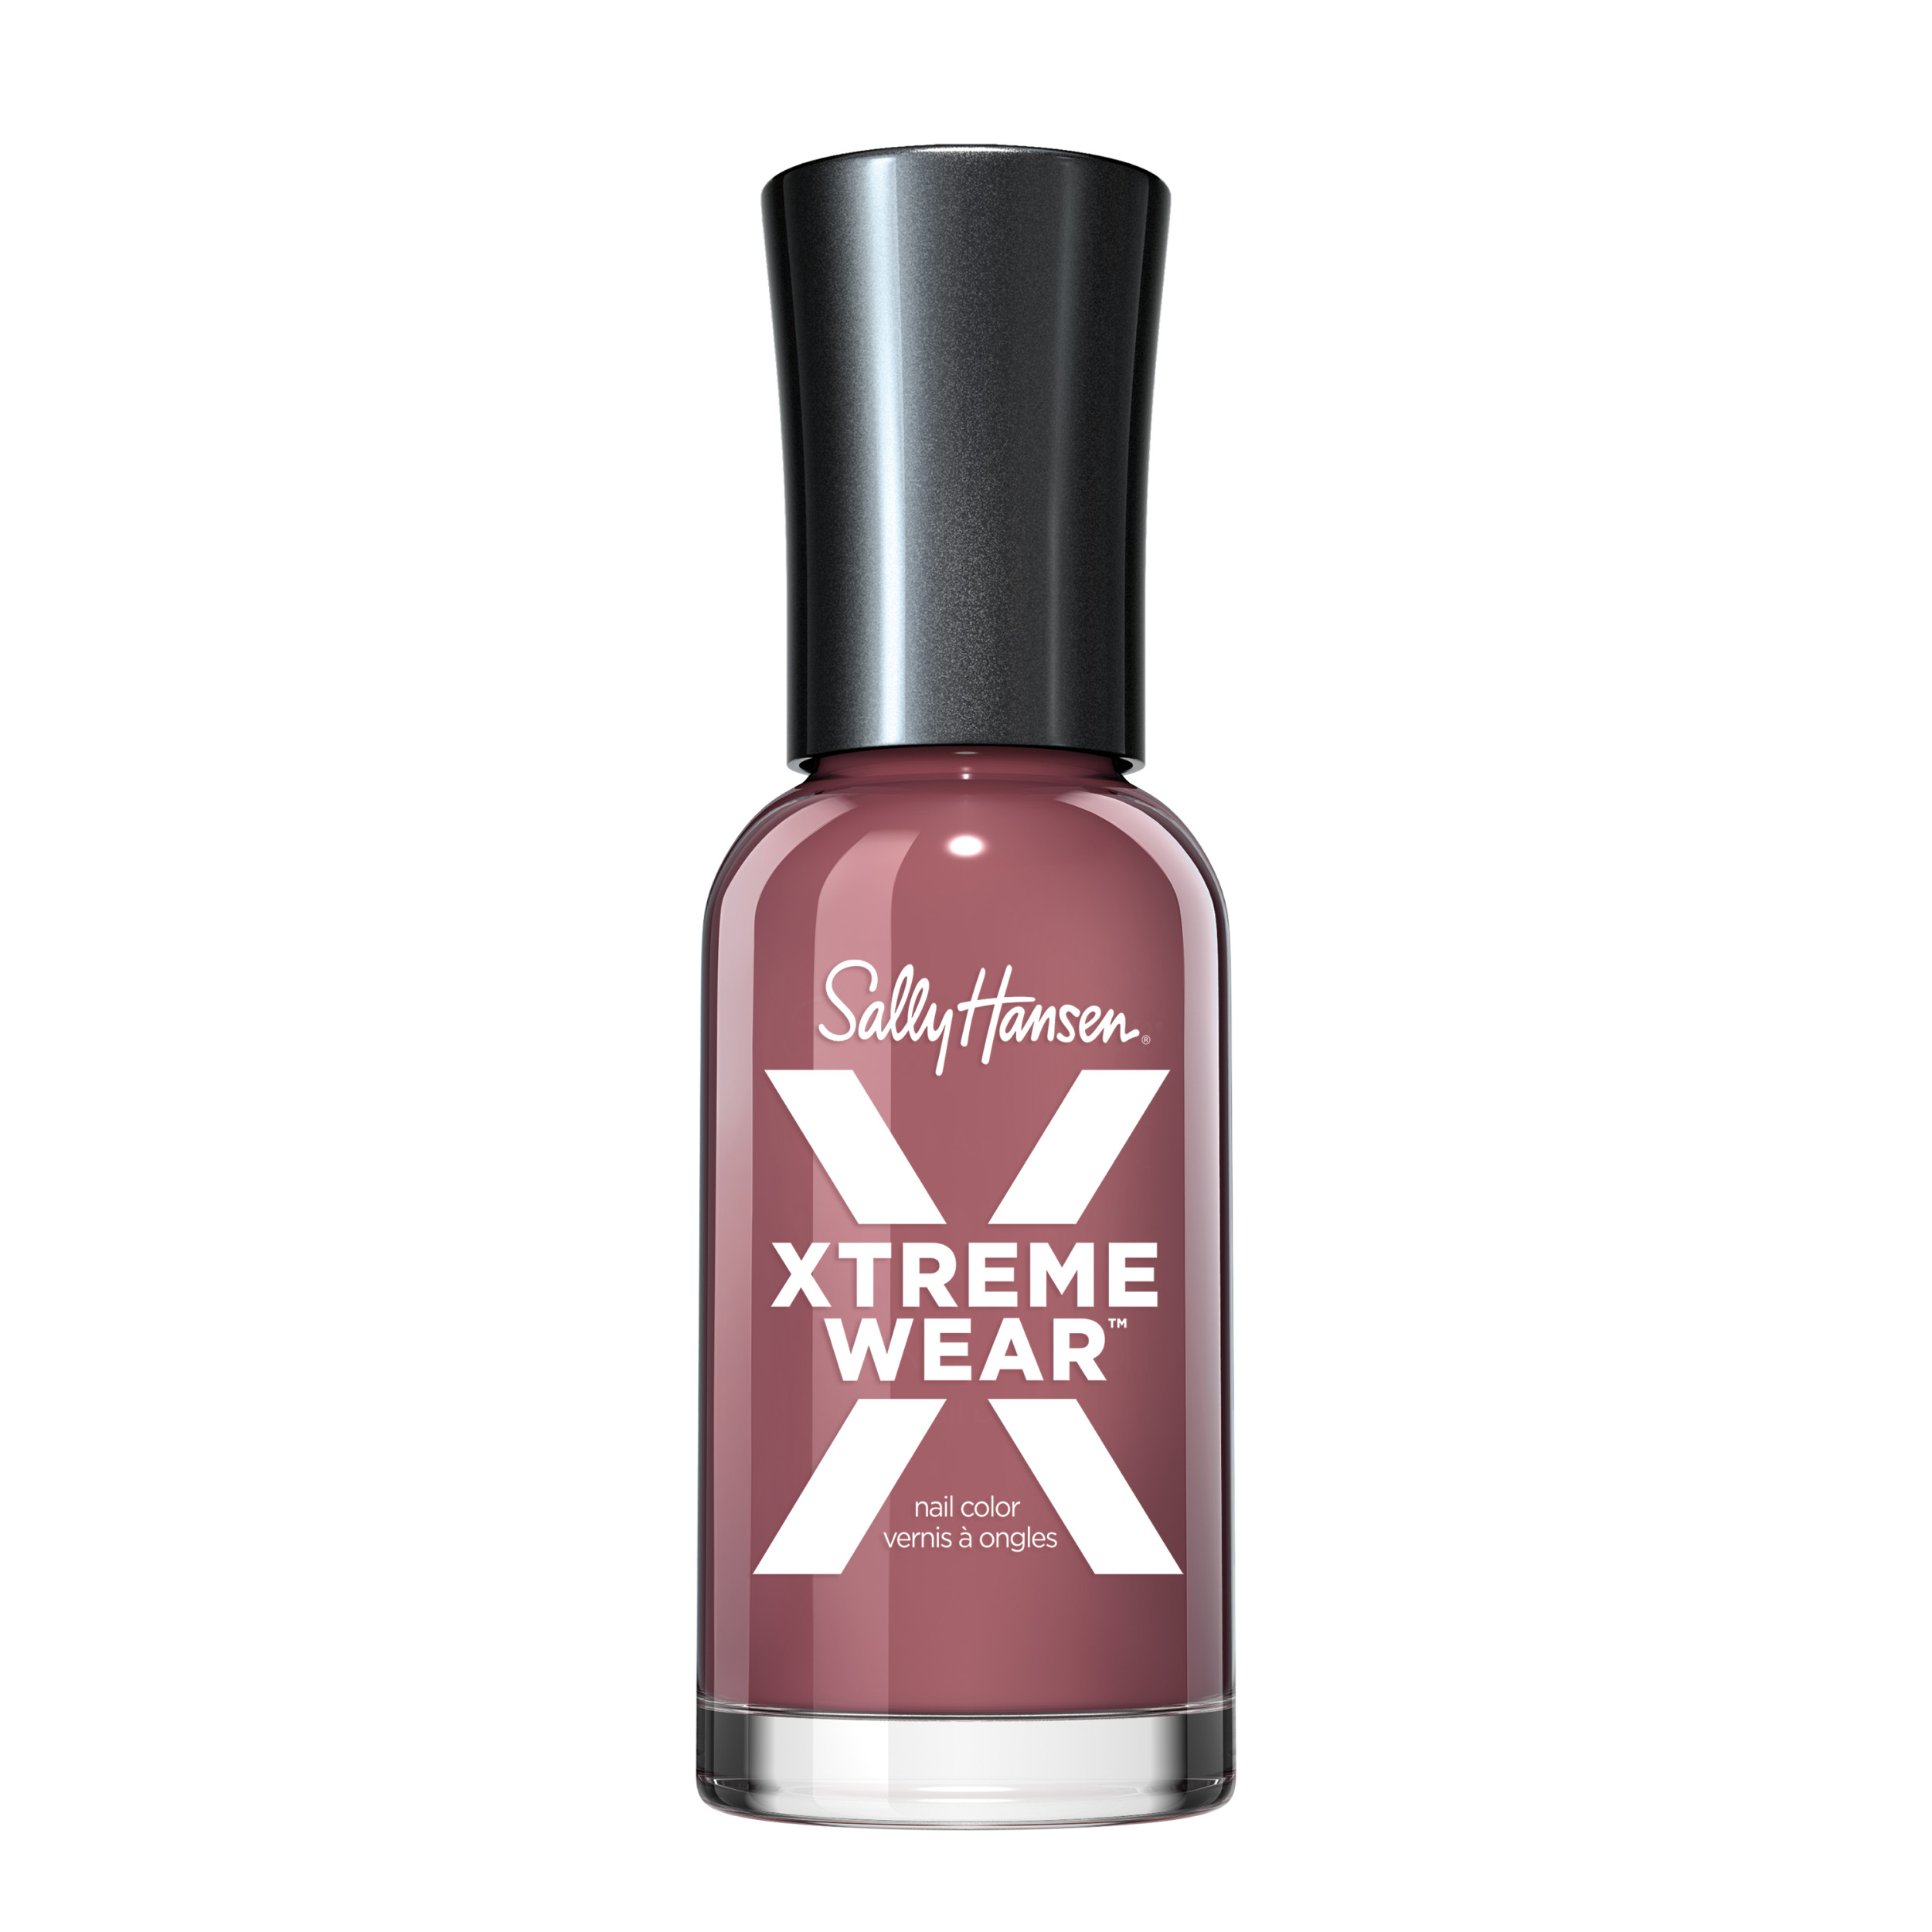 Sally Hansen Xtreme Wear Nail Polish, Mauve Over, 0.4 oz, Chip Resistant, Bold Color - image 1 of 14